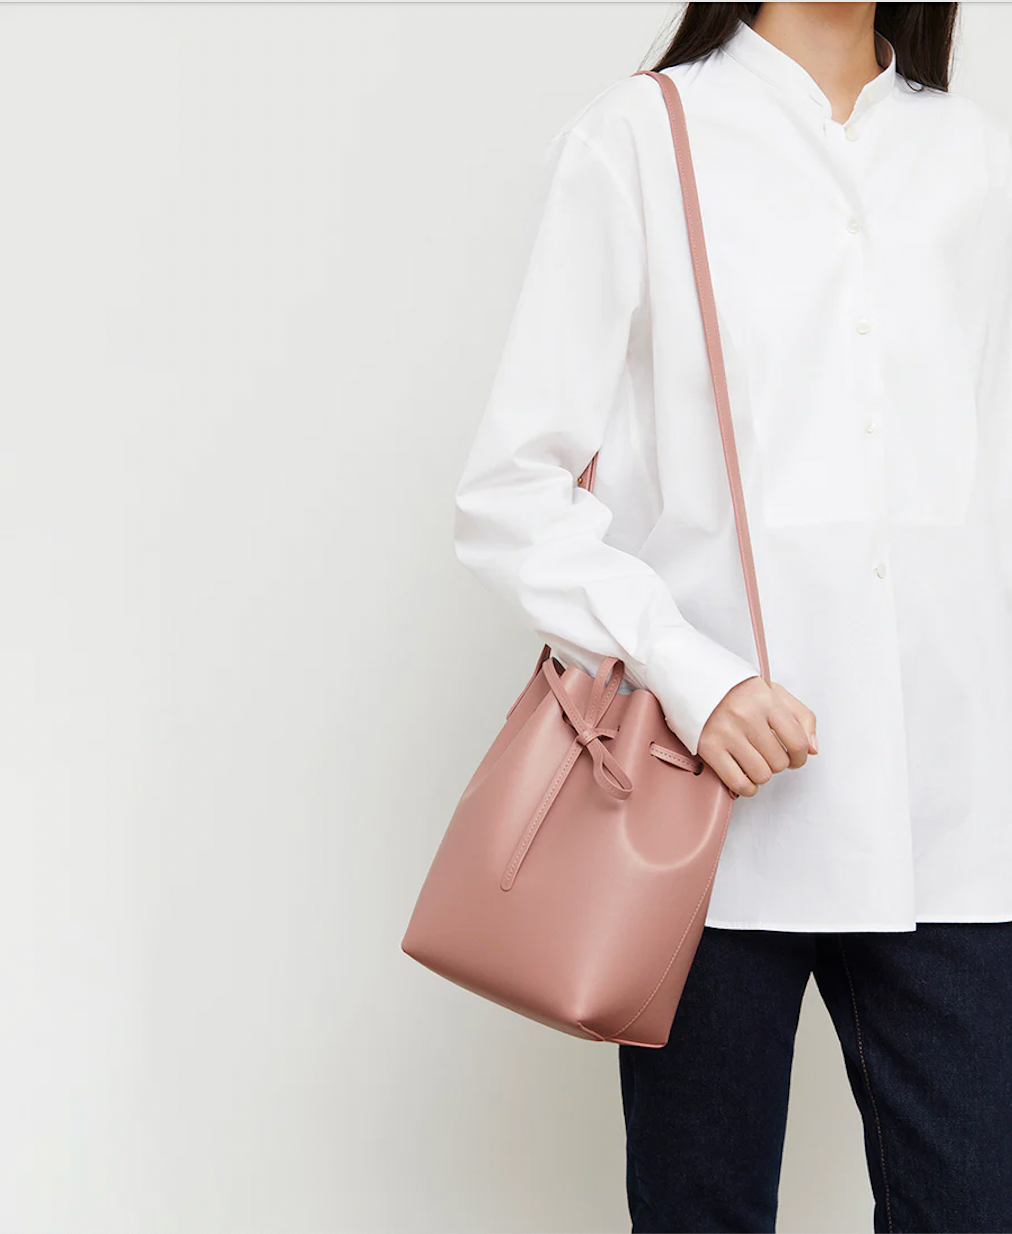 We're Obsessed With Mansur Gavriel: The New Handbag Line Every